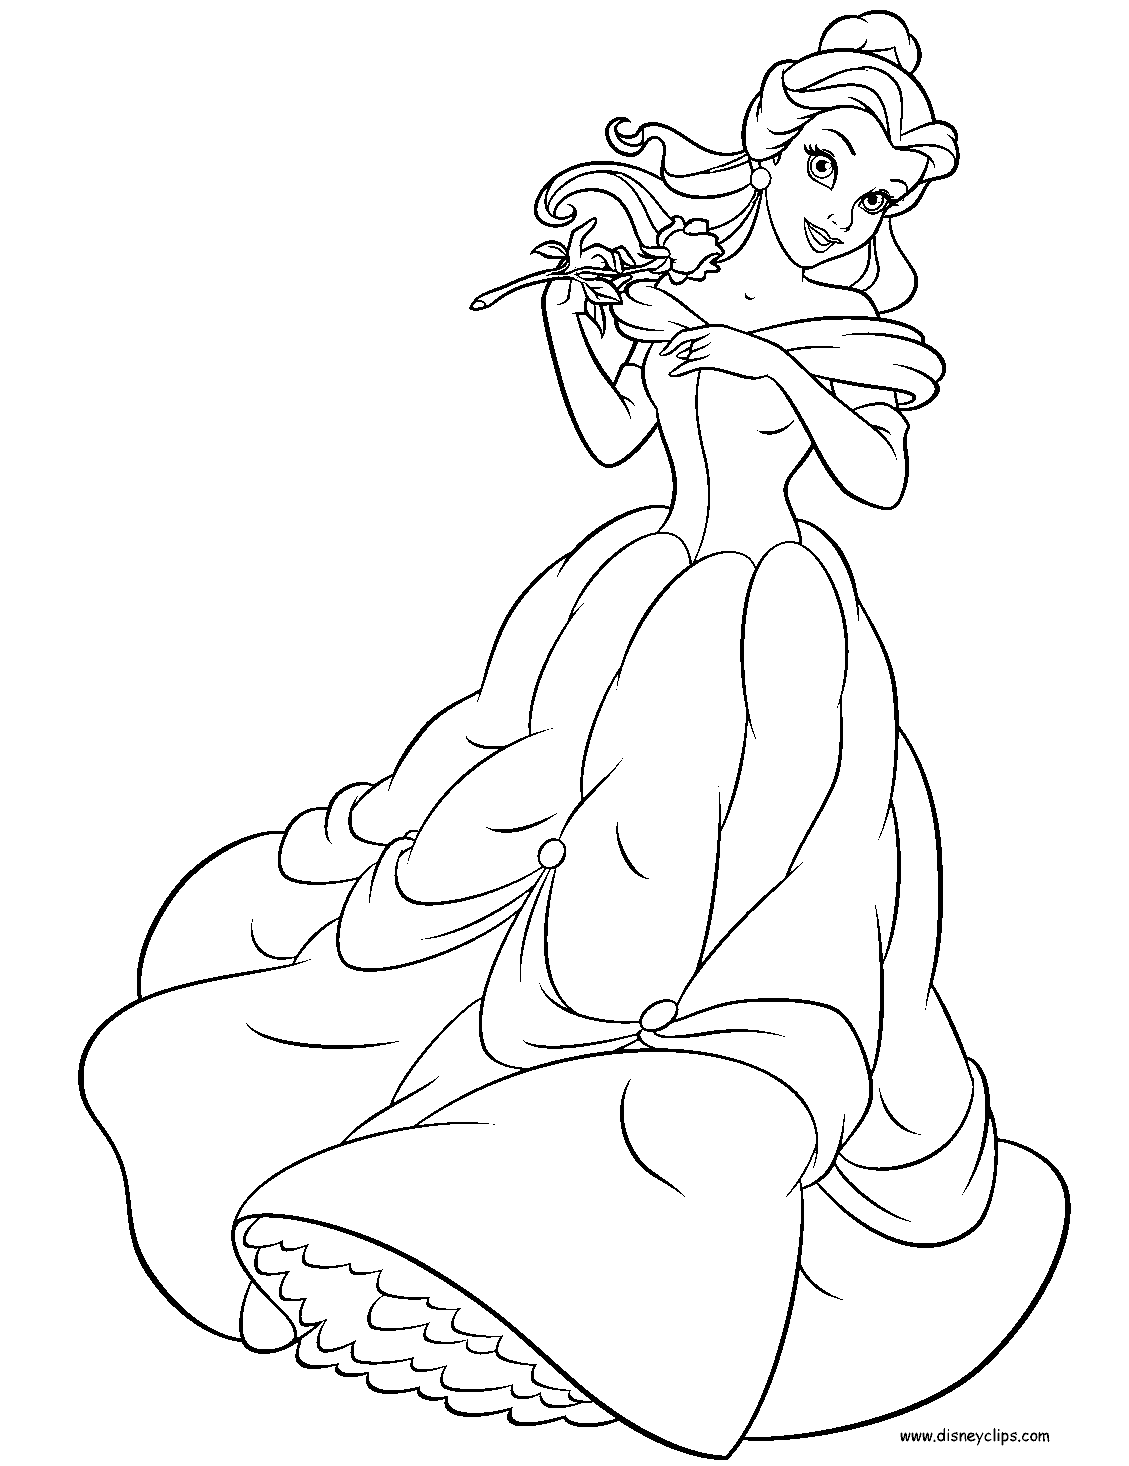 Princess Belle with Rose Coloring Pages   Belle Coloring Pages ...